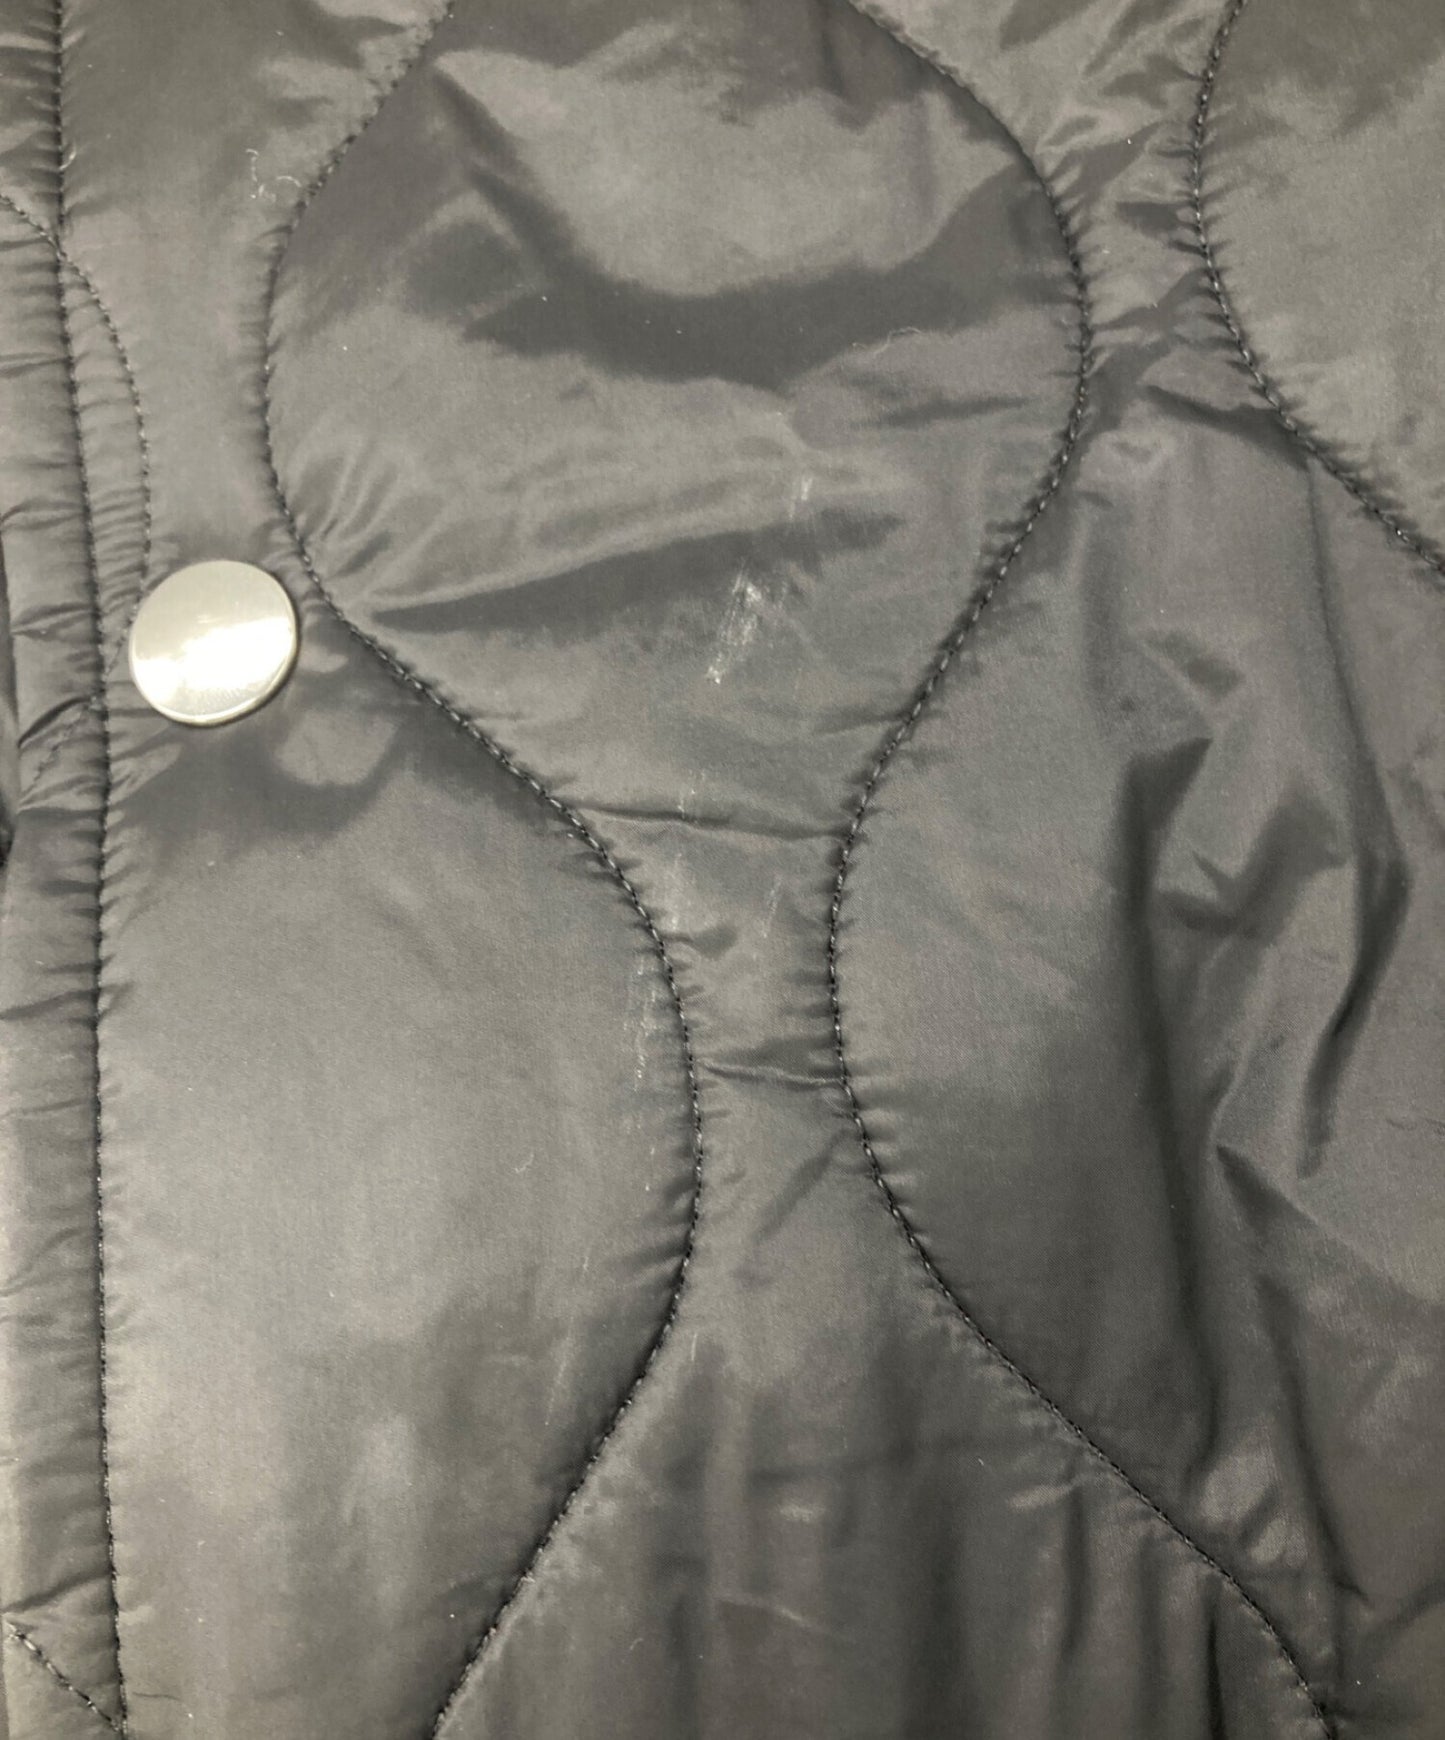 [Pre-owned] COMME des GARCONS tricot Quilted Nylon Coat TH-C010